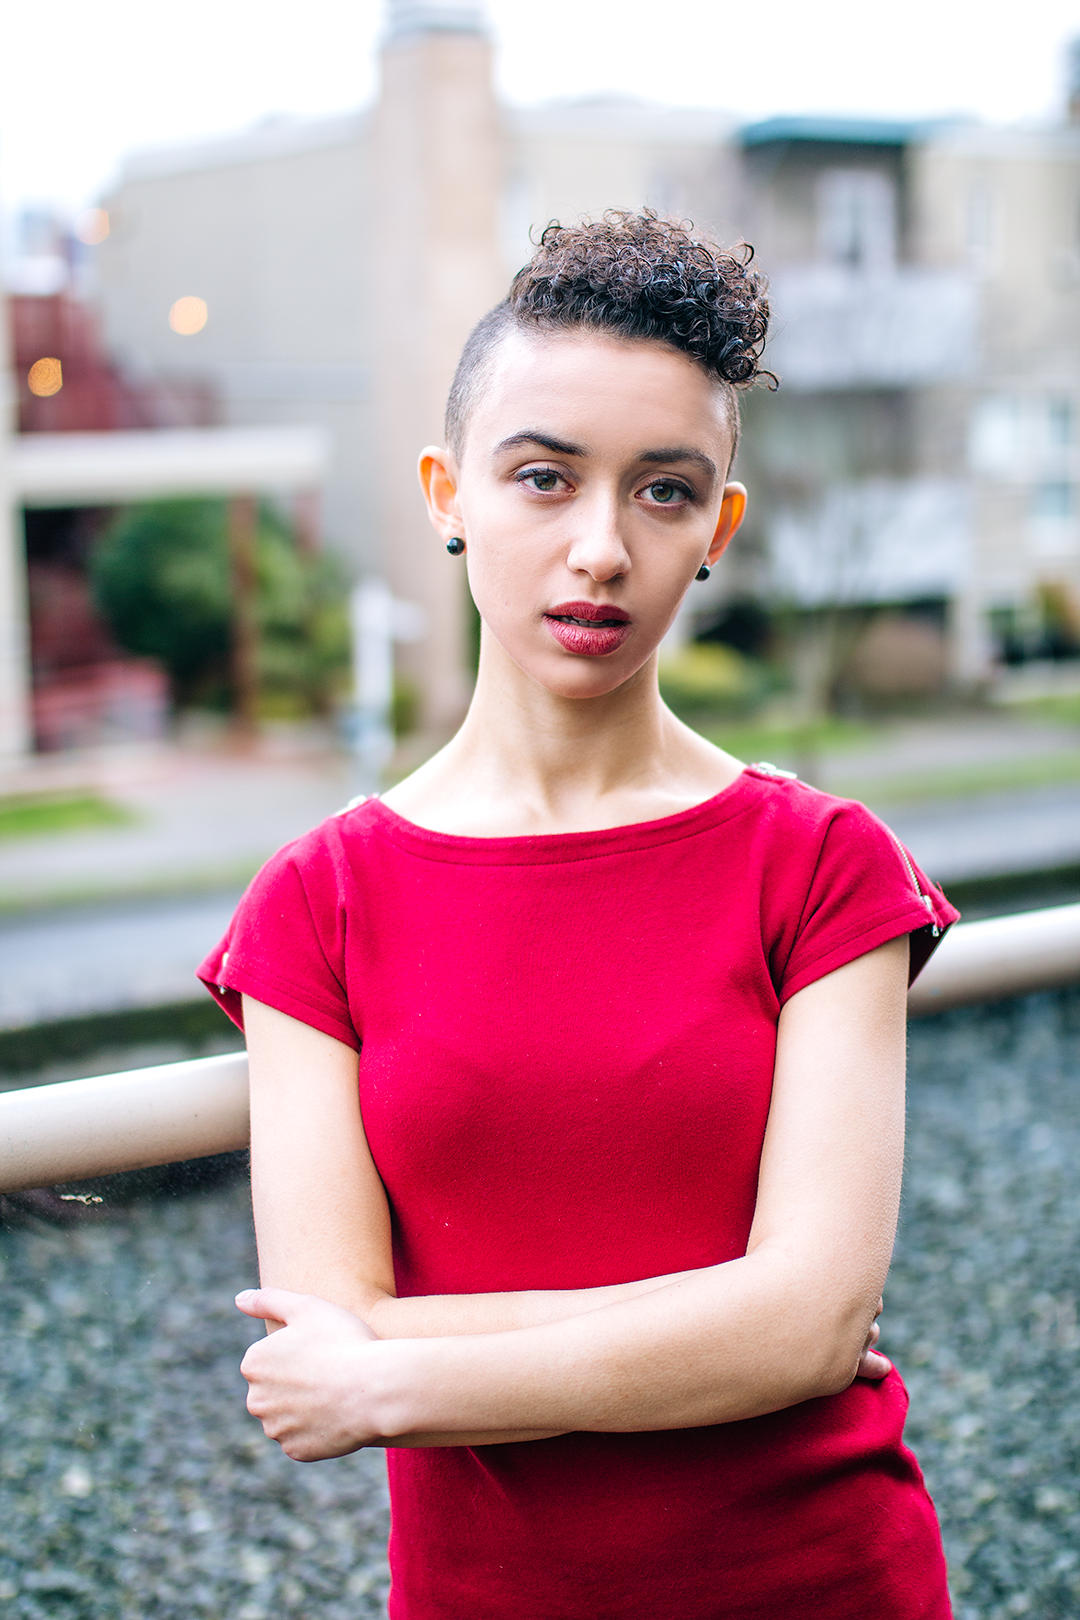 Lili Robinson, a genderfluid femme person in their mid-twenties, looks directly into the camera. They have light brown skin and short curly brown hair that is shaved on the sides, and they are wearing a red dress. In the background a gravel rooftop and apartment building across the road behind are blurred but visible.